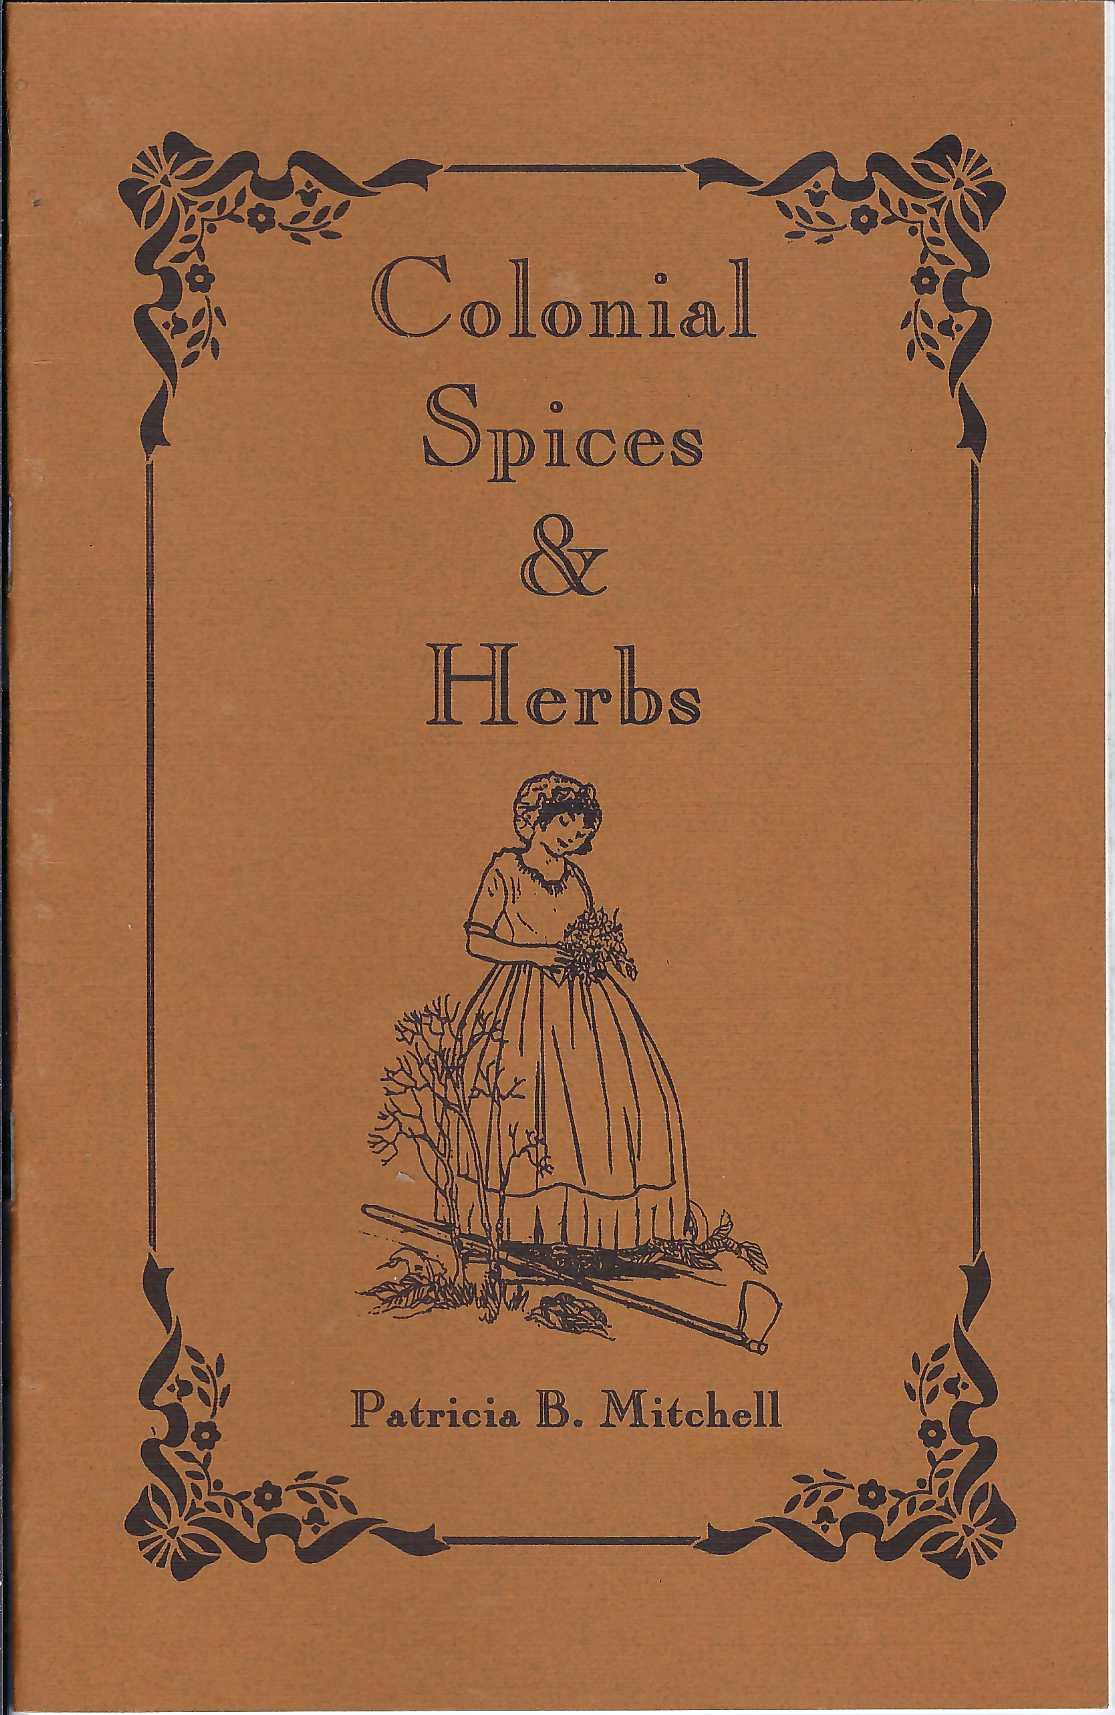 Colonial Spices & Herbs